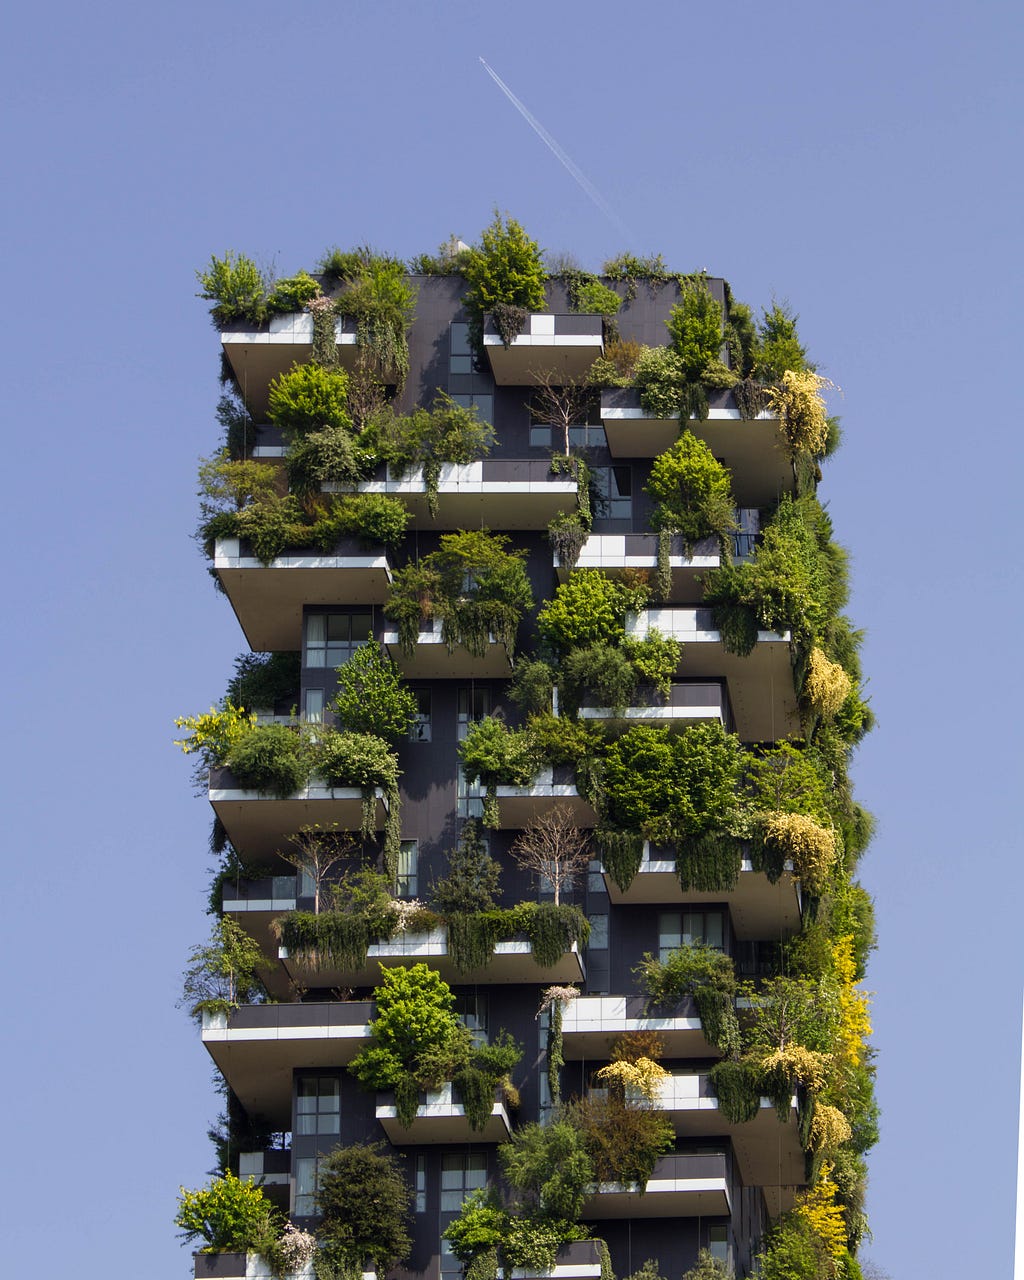 Apartment building with lush vegetation hanging off of each balcony